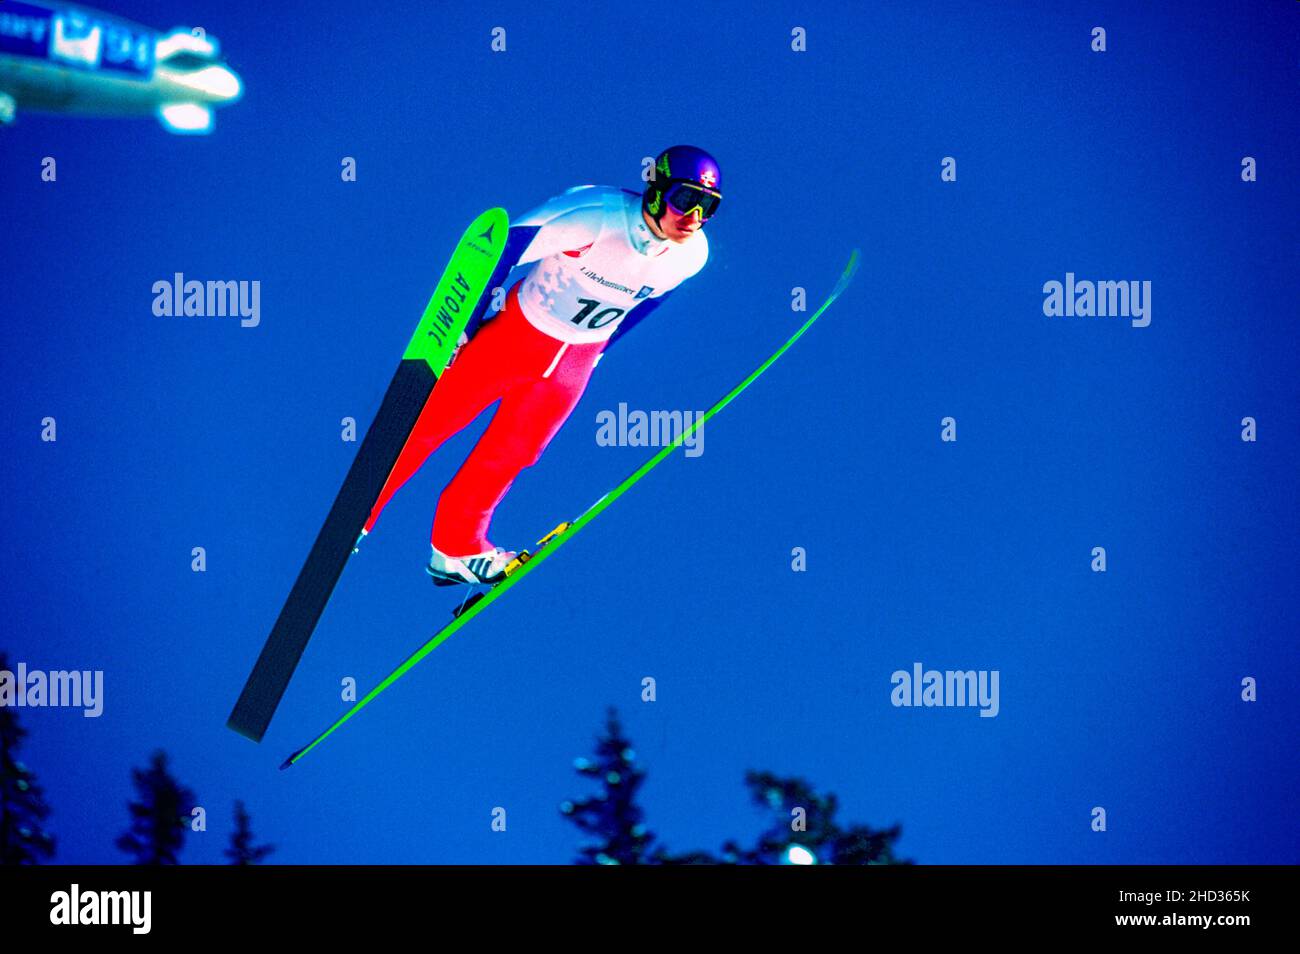 Stein Henrik Tuff (NOR) competing in the Men's K120 individual ski jumping at the 1994 Olympic Winter Games Stock Photo